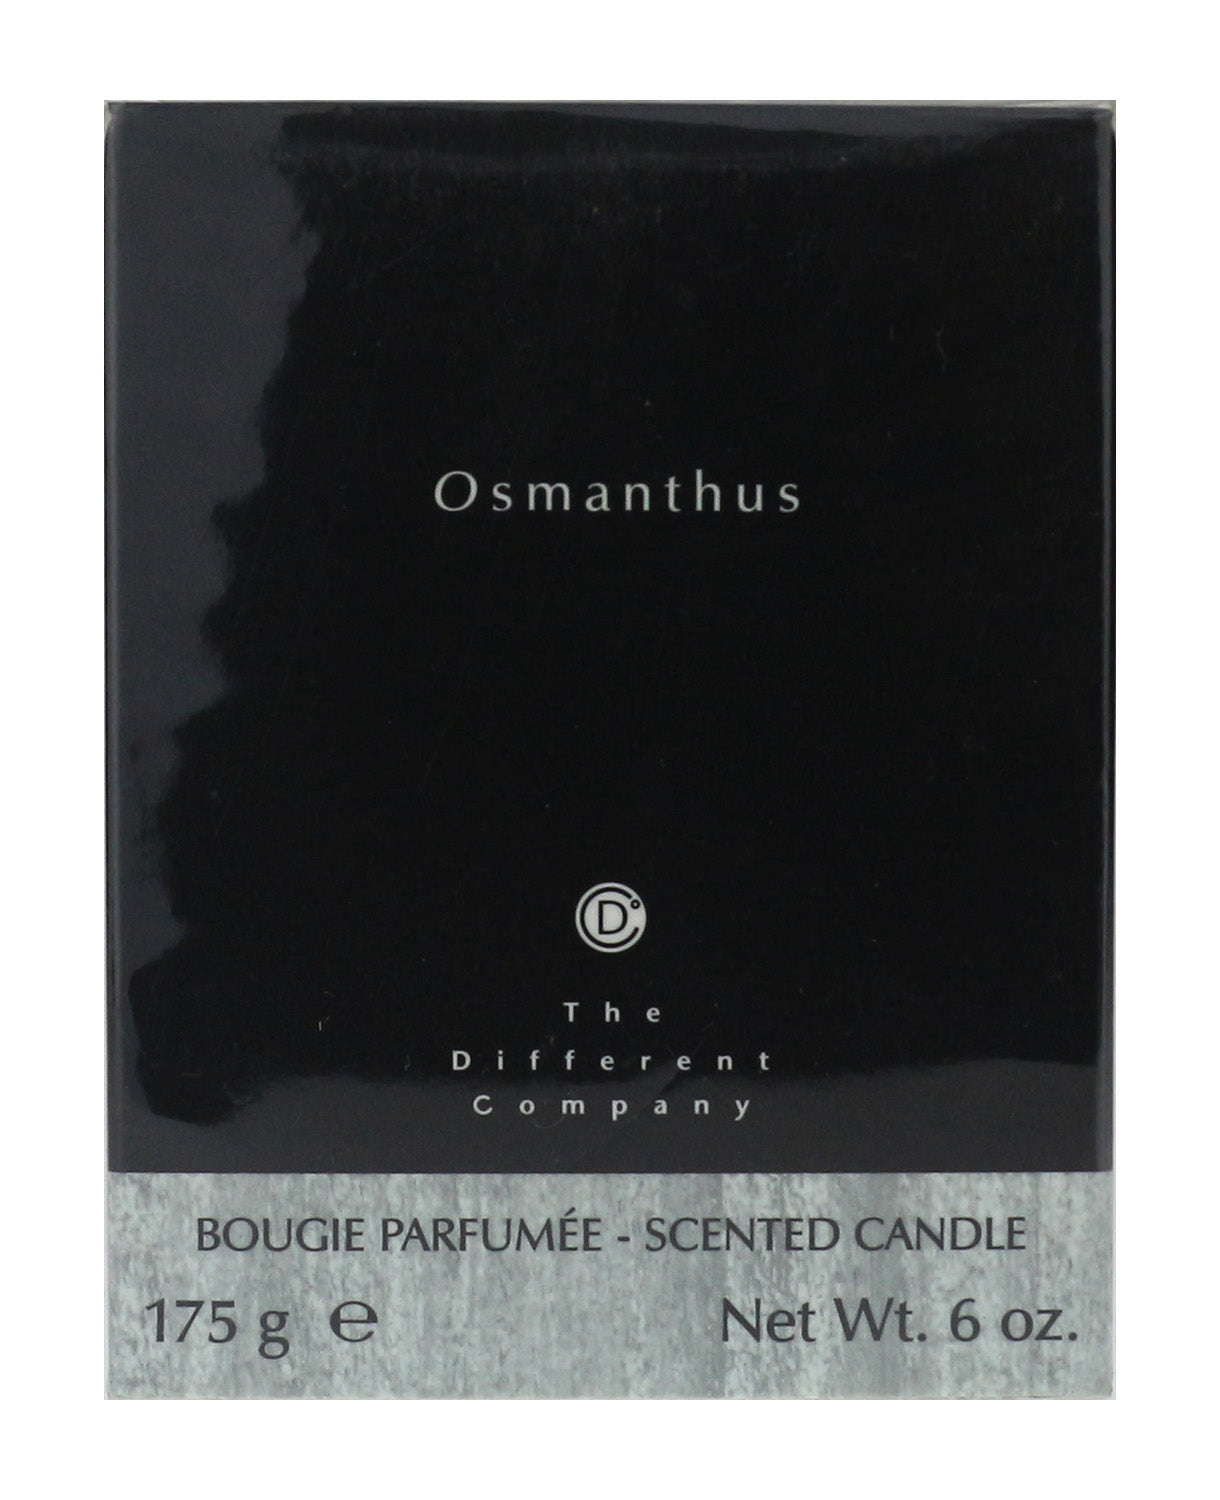 The Different Company Osmanthus Scenter Candle 6.0Oz/175g New In Box